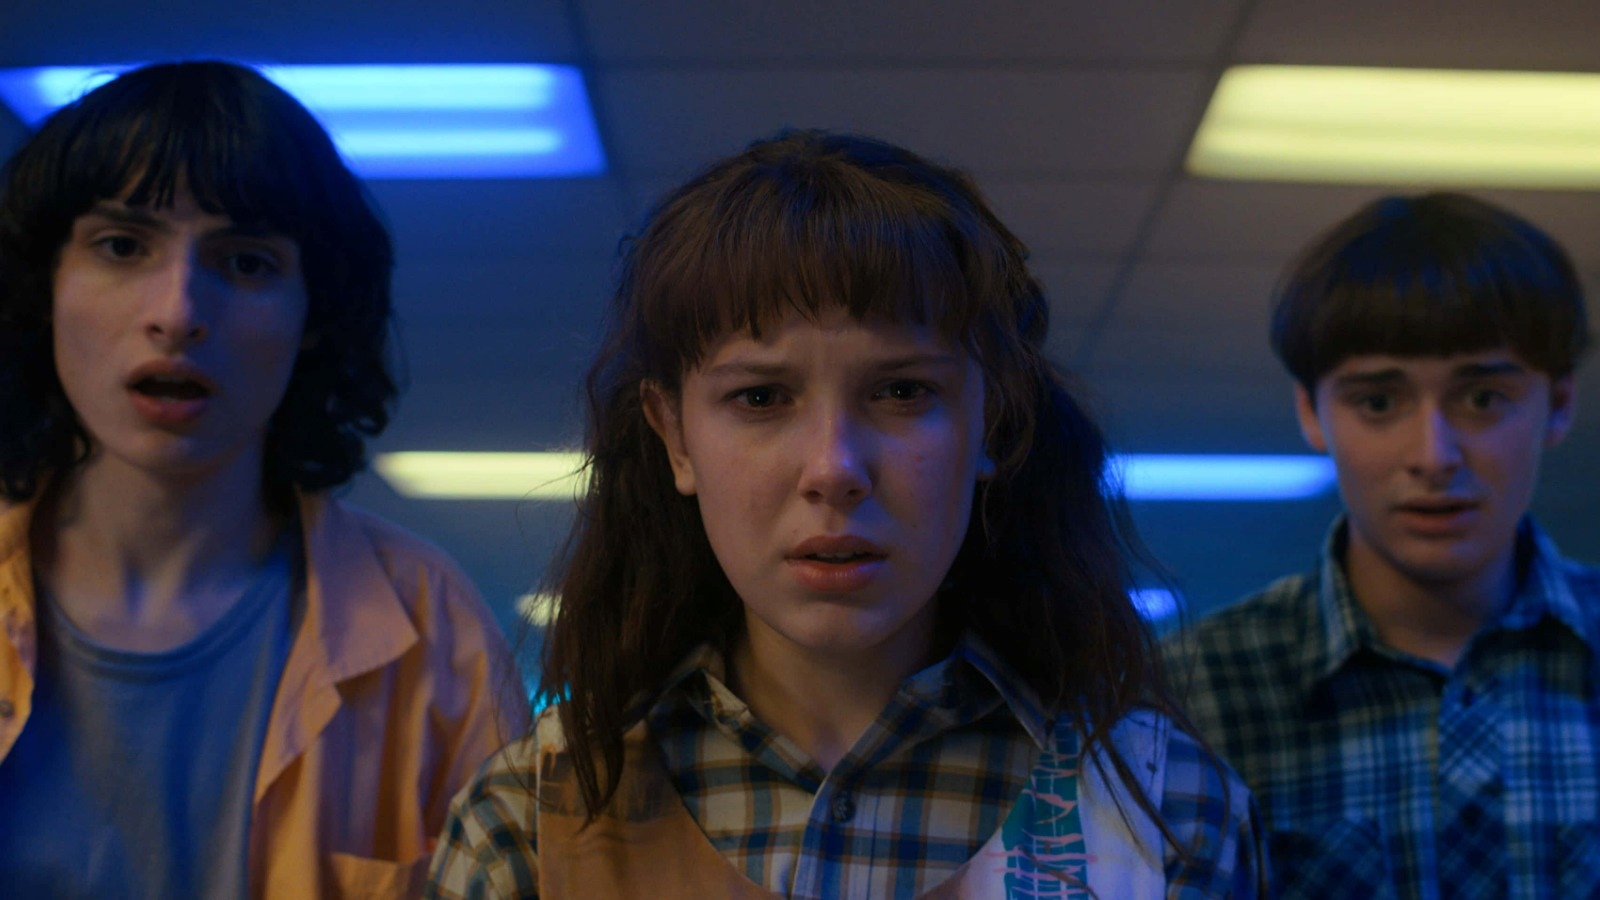 How To Watch Stranger Things Season 4 Without Netflix For Free